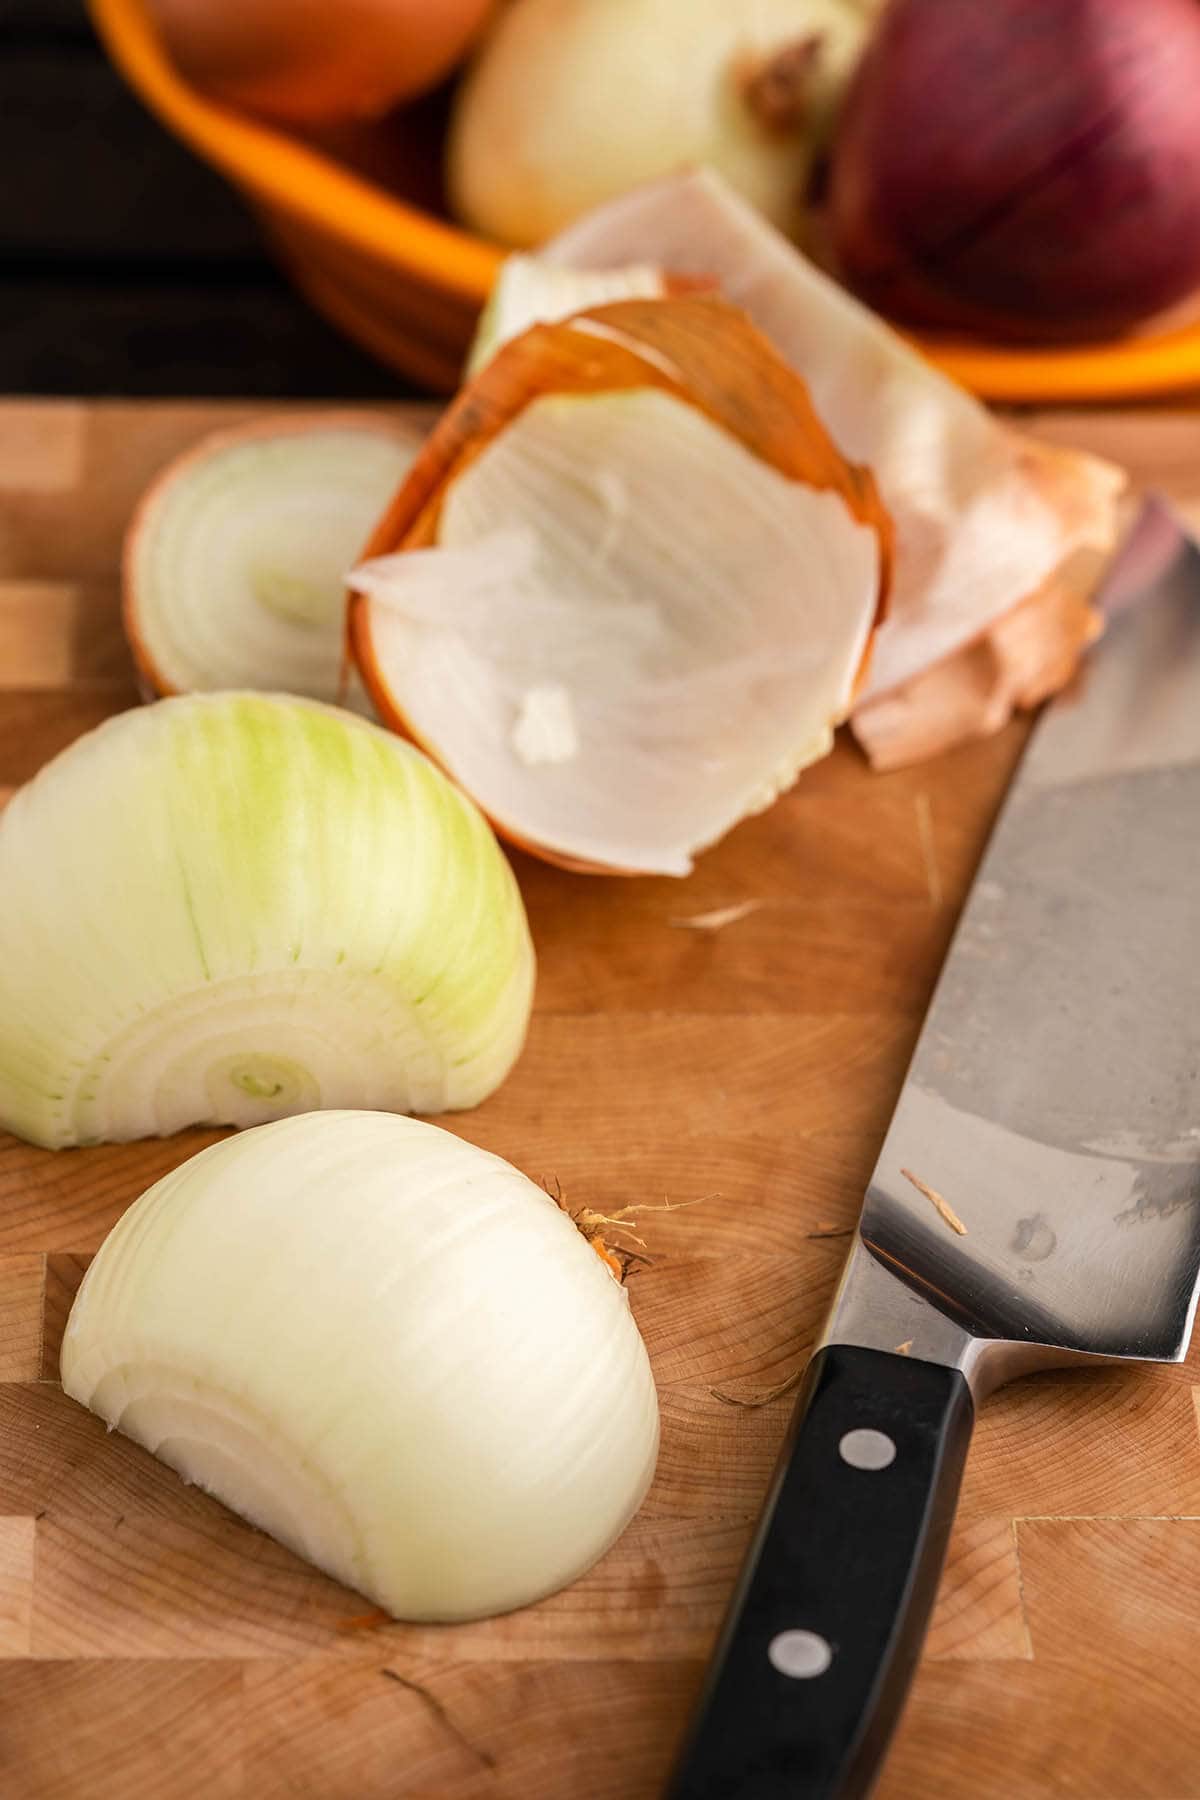 An onion that's been sliced in half and peeled.